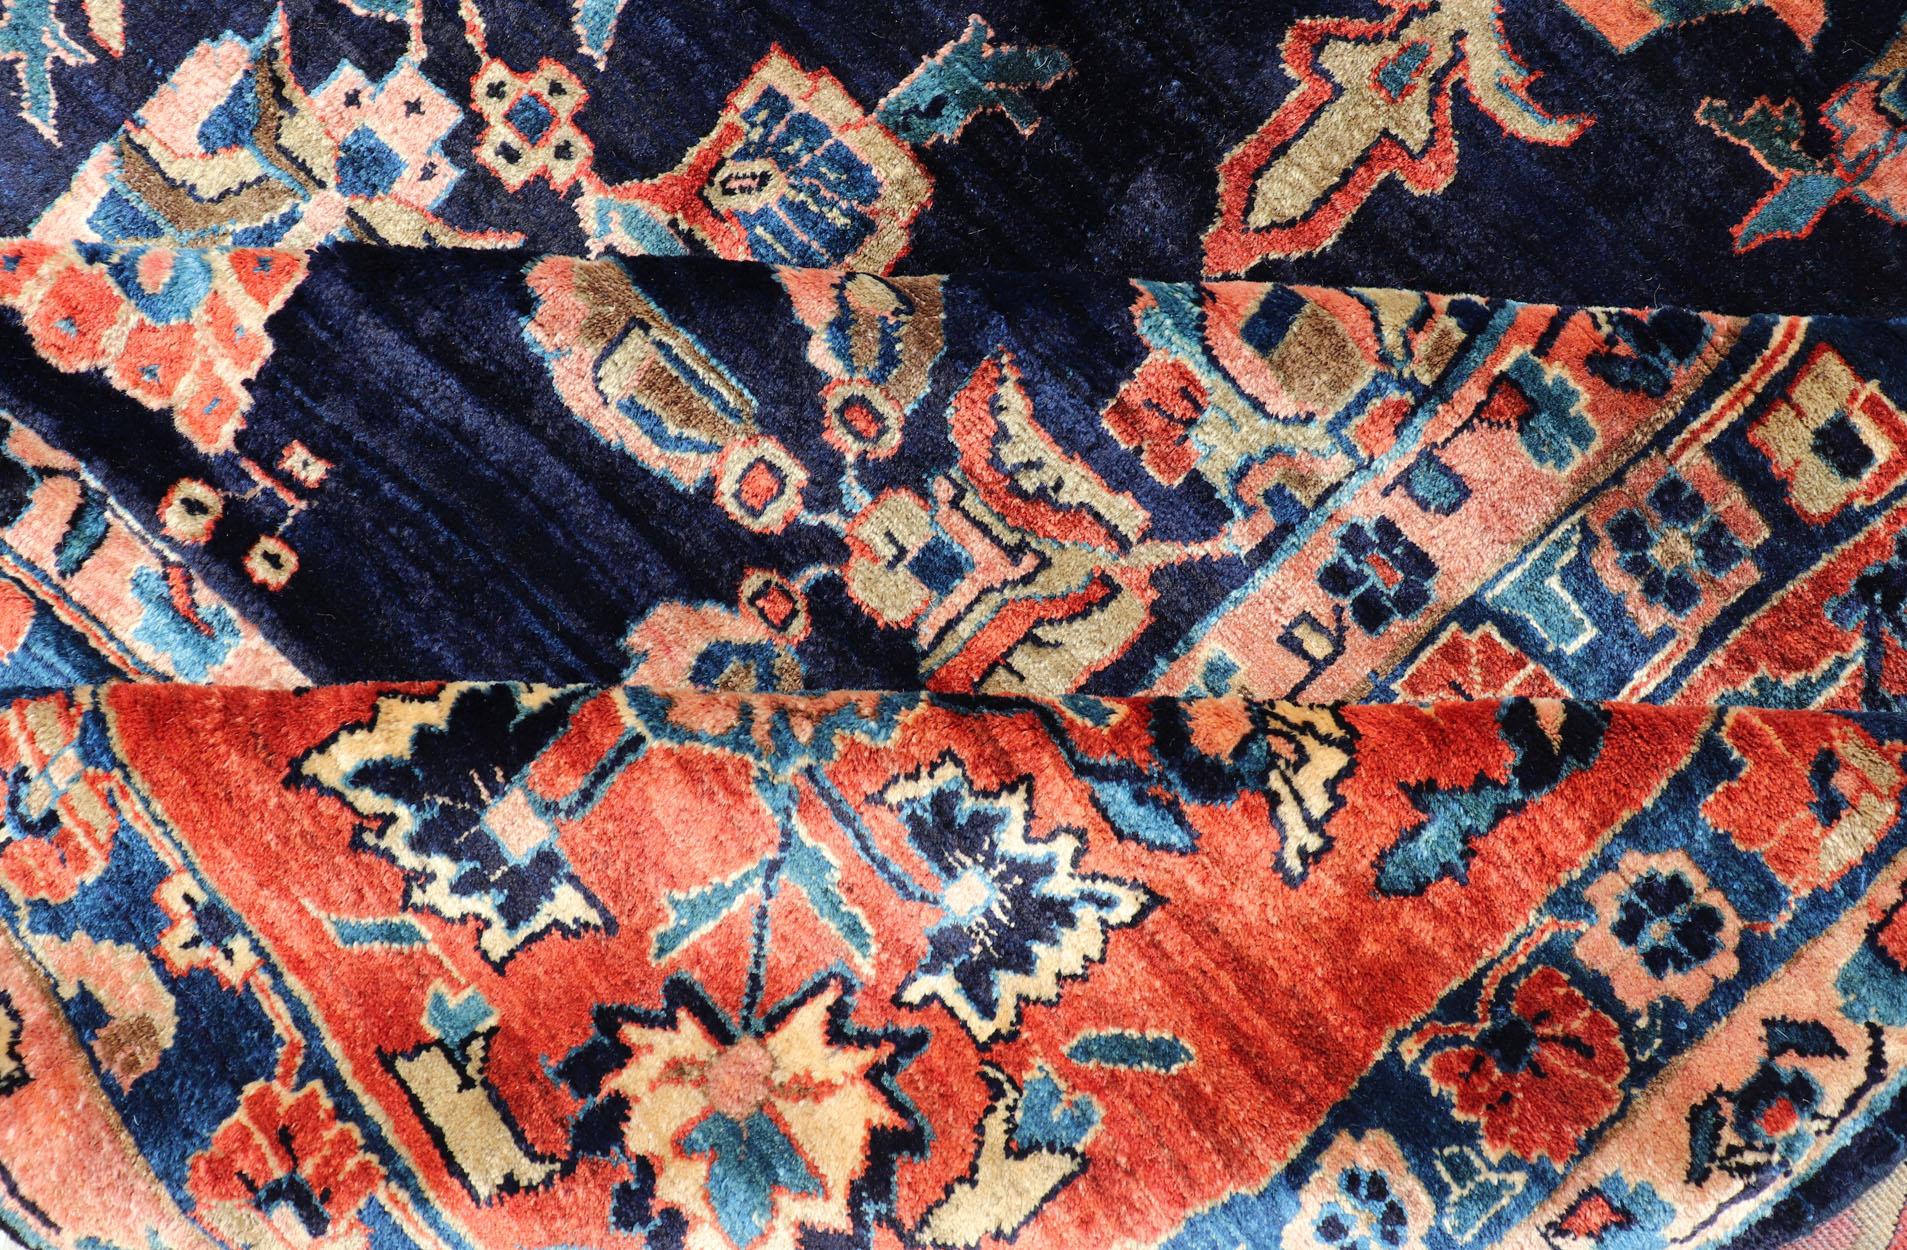 20th Century Antique Large Sarouk Faraghan Rug with Floral Pattern in Navy and Orange-Red For Sale